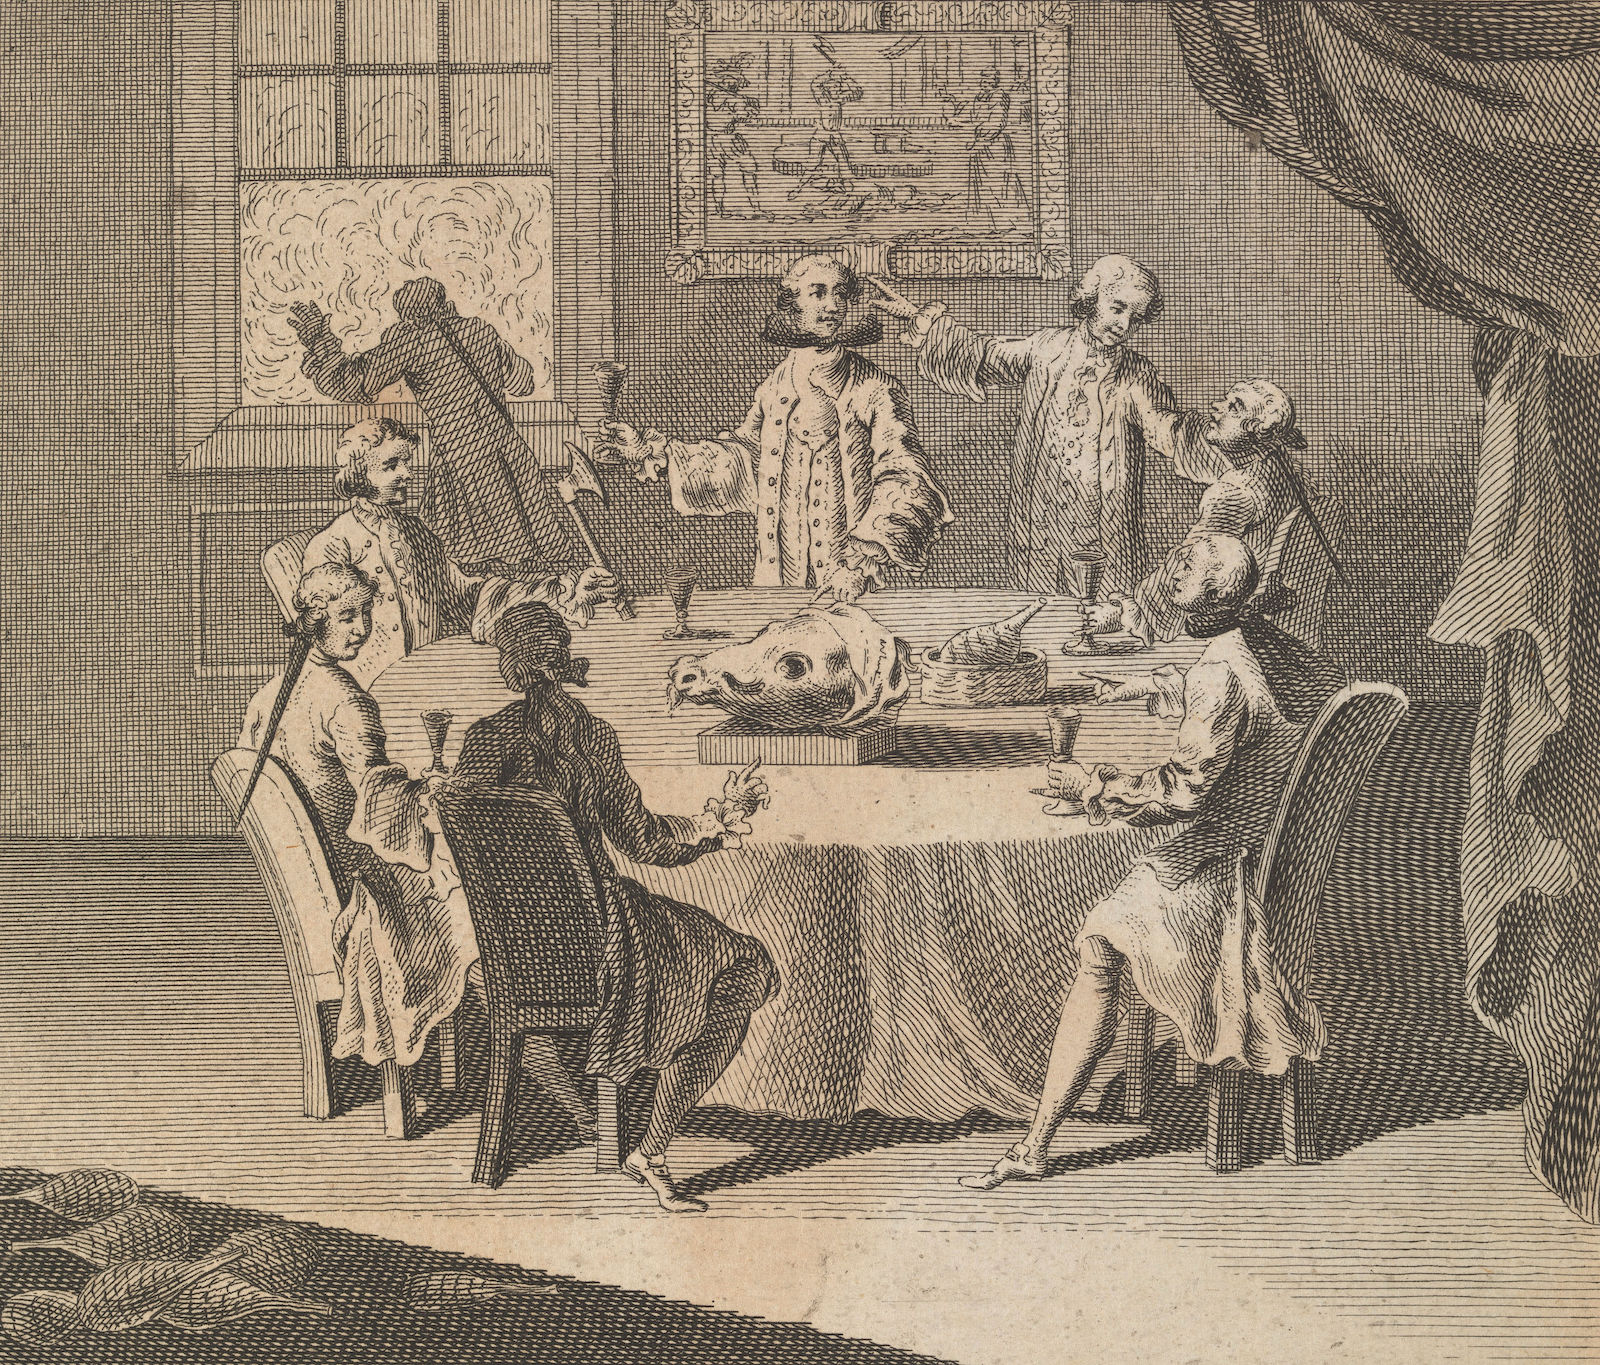 A ‘Calf's Head Club’ meeting of Whigs celebrating the anniversary of Charles I’s execution, 1734. Wellcome Collection. Public Domain.